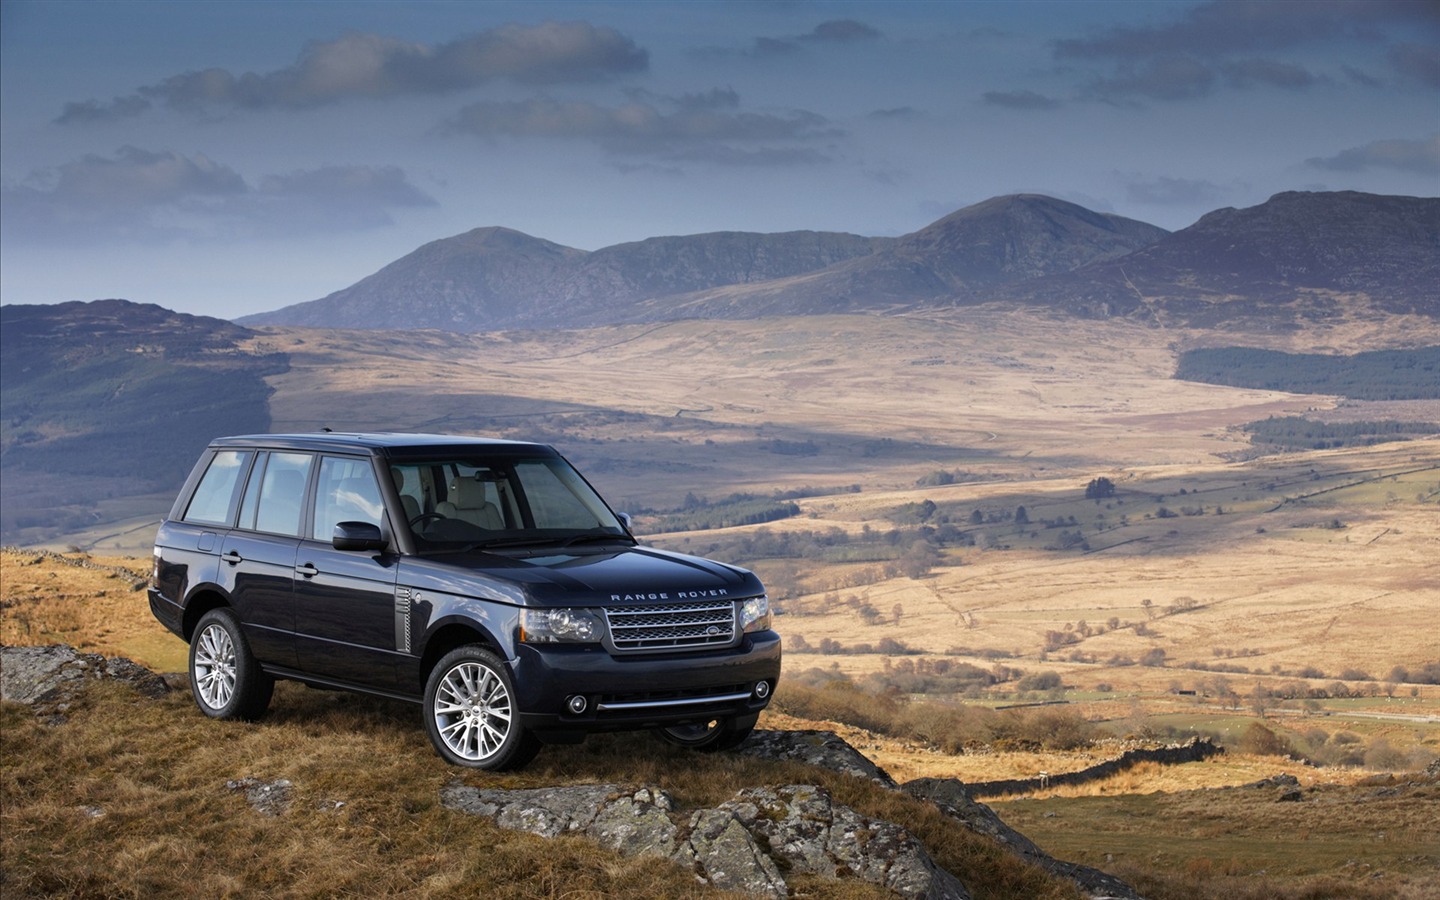 Land Rover wallpapers 2011 (2) #5 - 1440x900